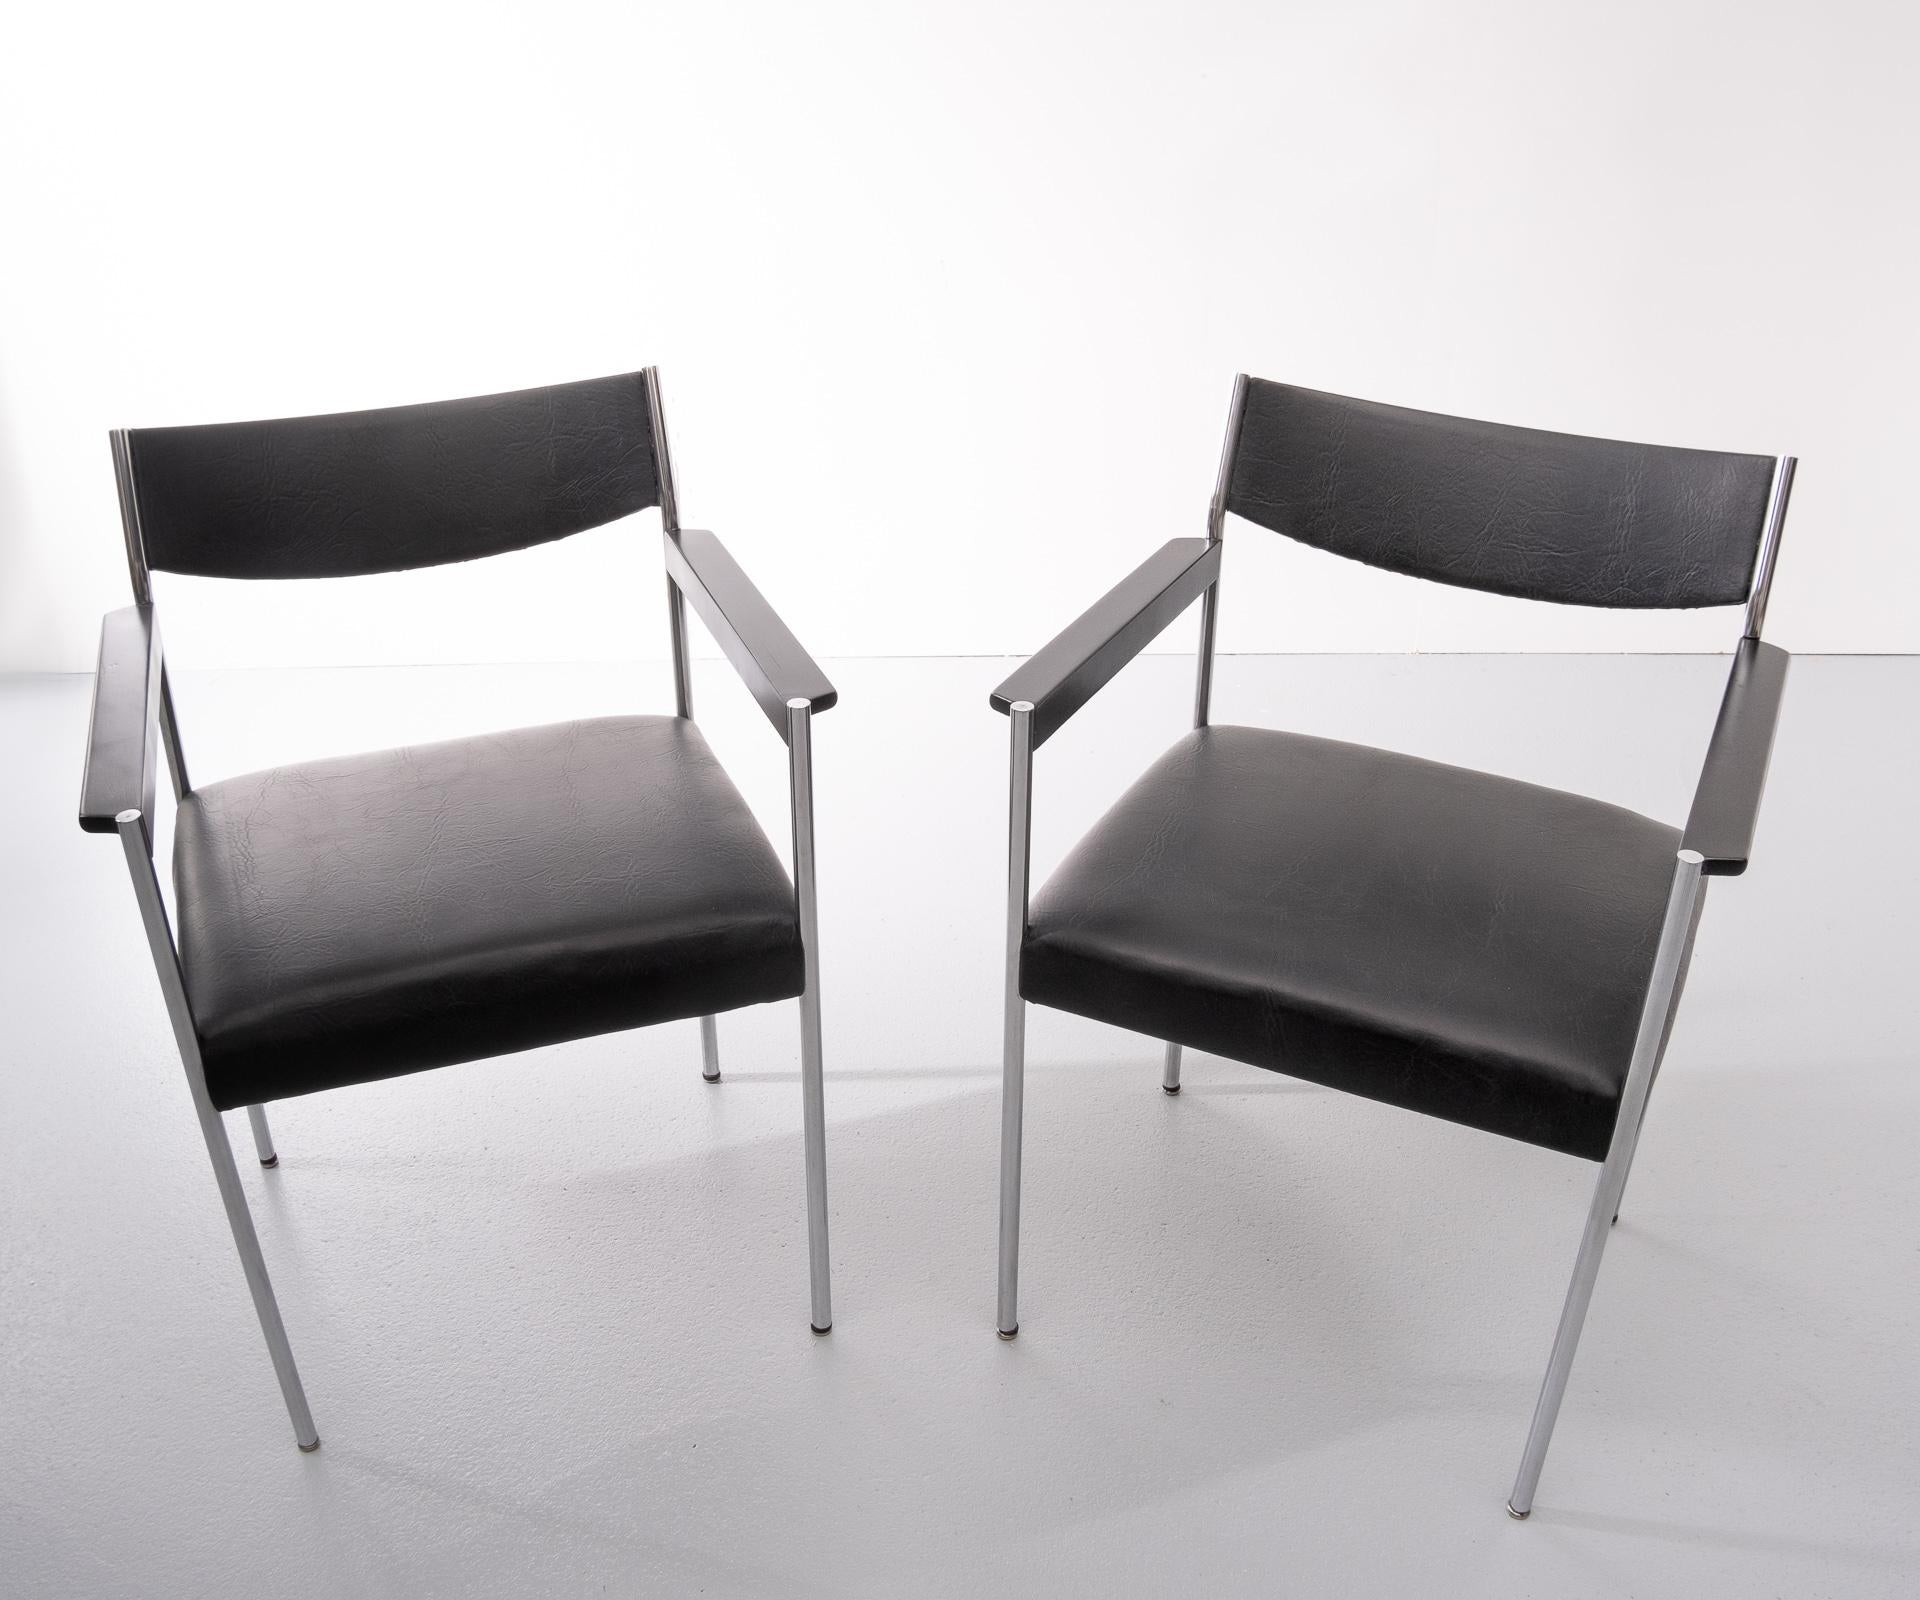 Two very nice armchairs manufactured by Kusch & Co Design Edlef Bandixen, 1970s.
Brushed steel frame, comes with black faux leather upholstery. Wooden armrests, signed. Good condition.